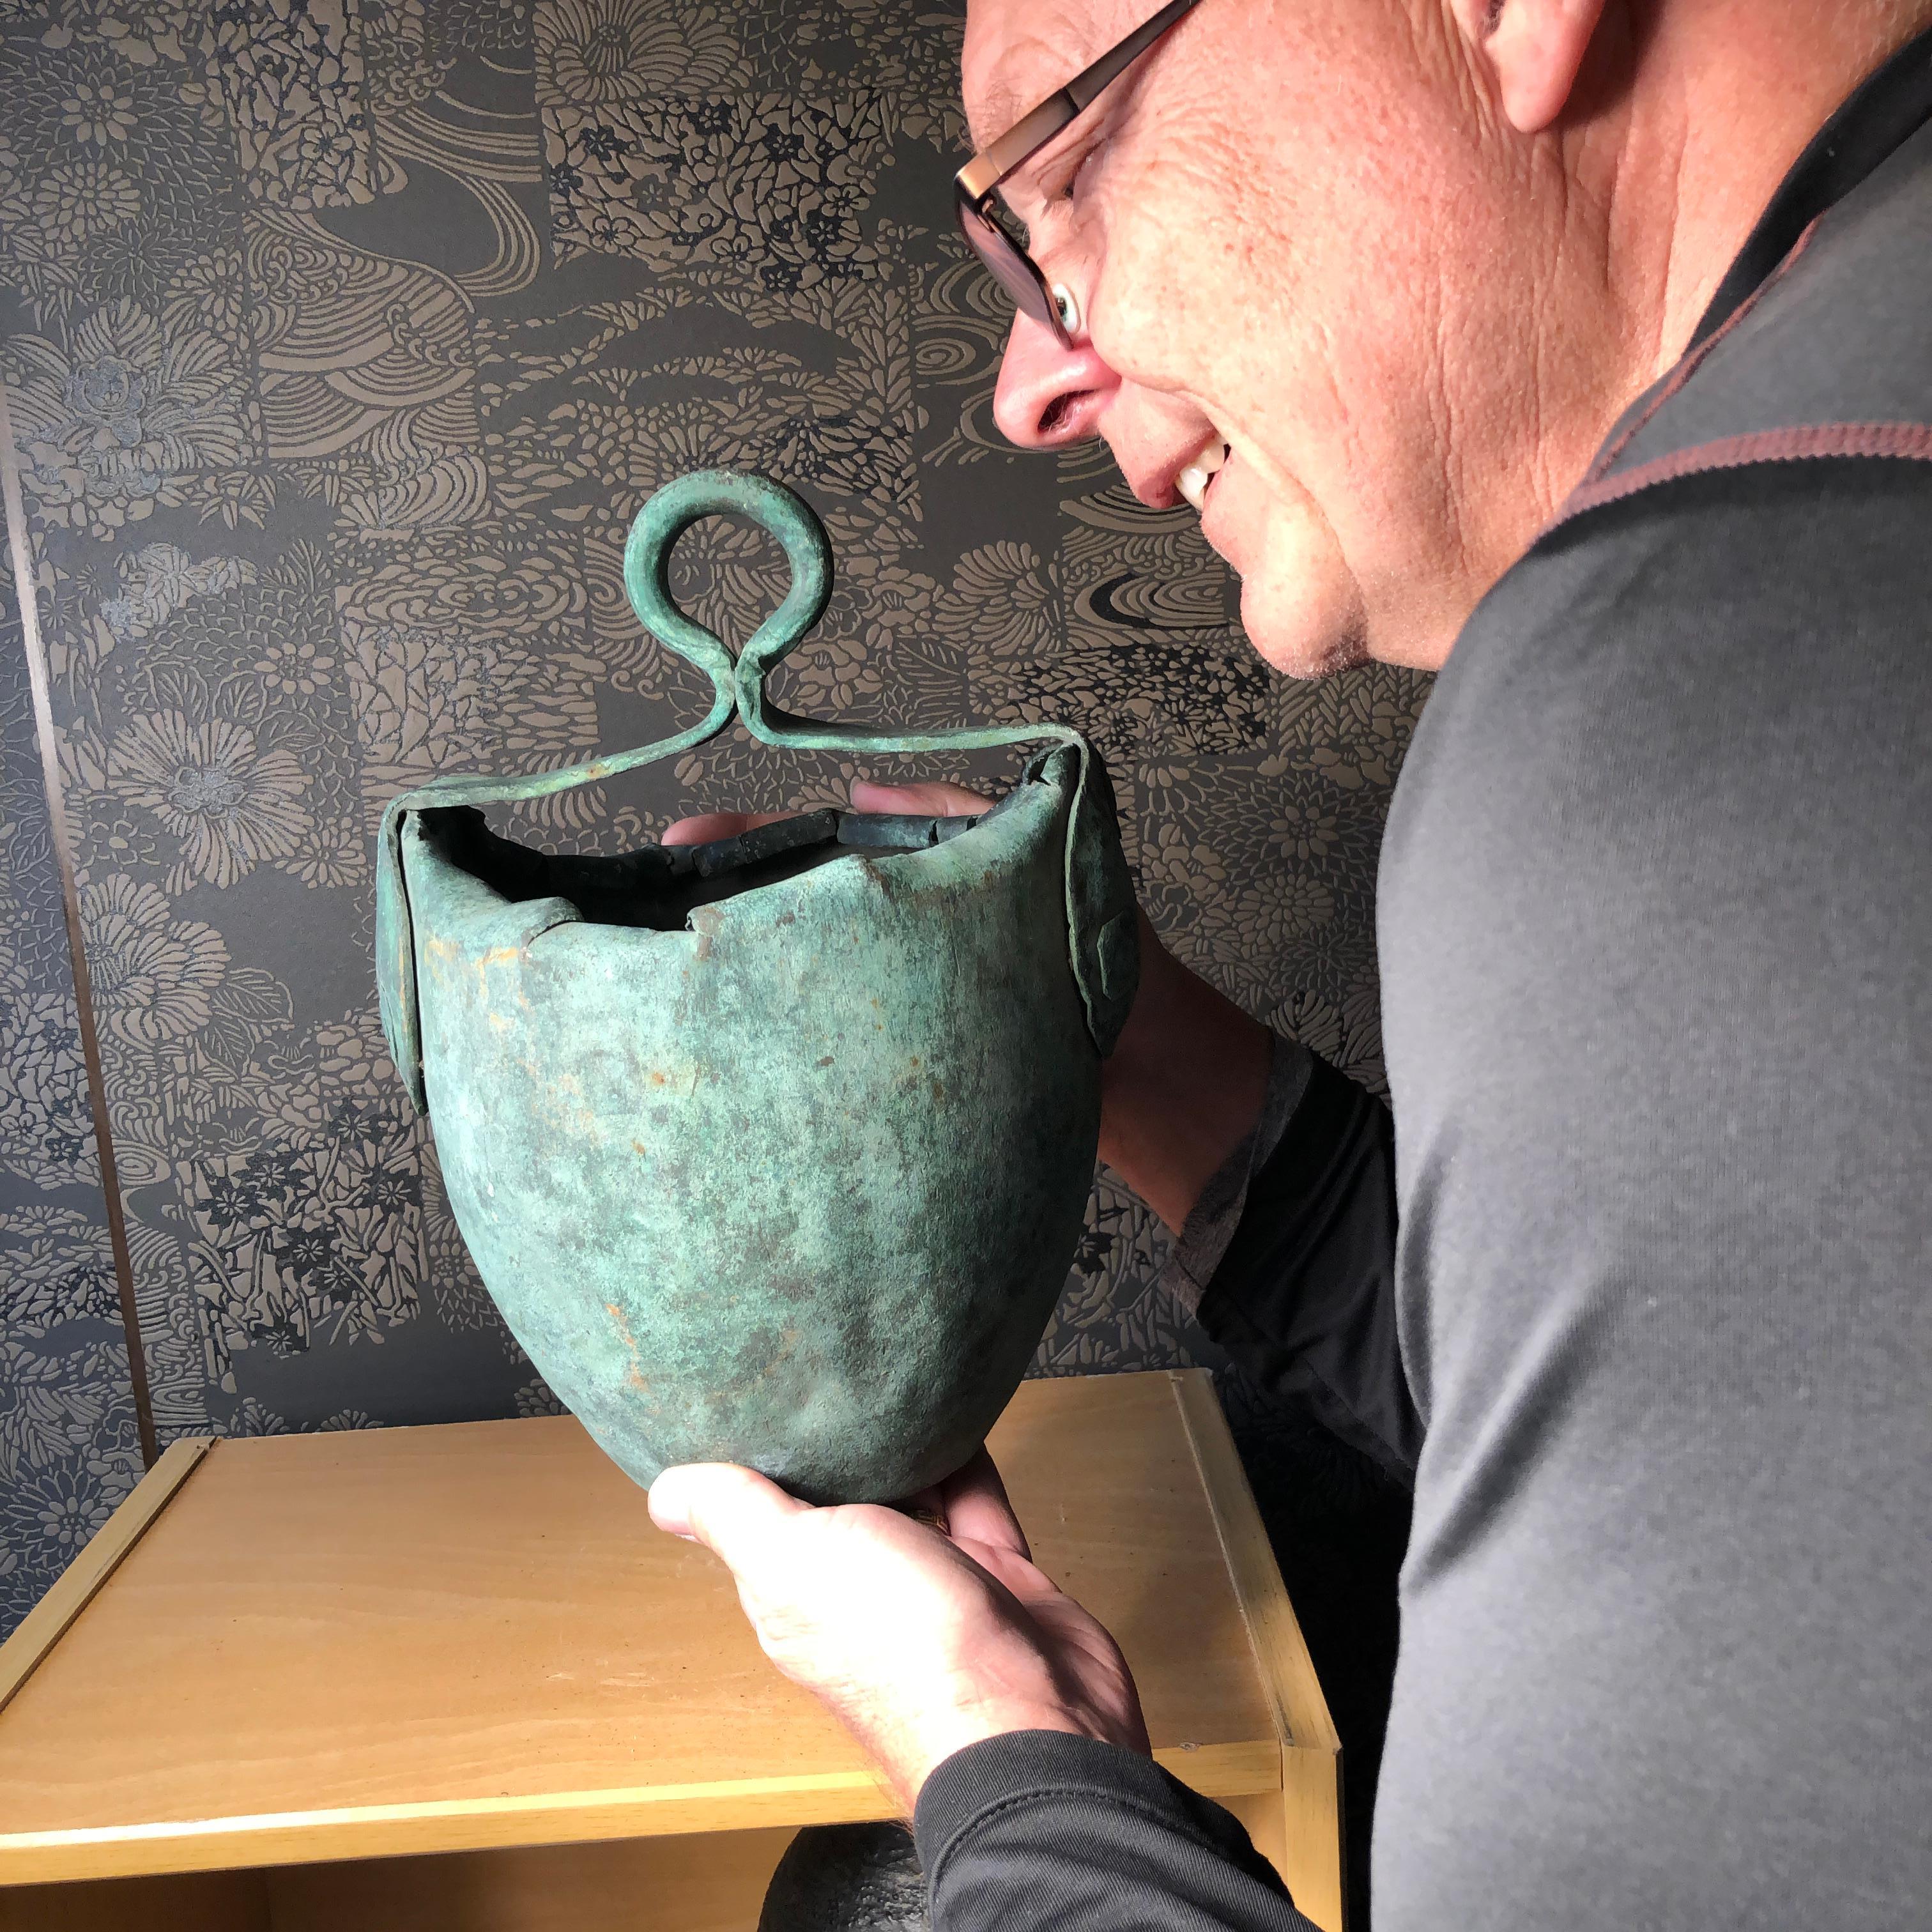 From our recent Japanese Acquisitions Travels

Japan, a fine hand forged bronze water bucket vessel dating way back to the late 18th century, Edo period.
Today these marvelous artifacts serve as wonderful planters and decorative accents. 

The